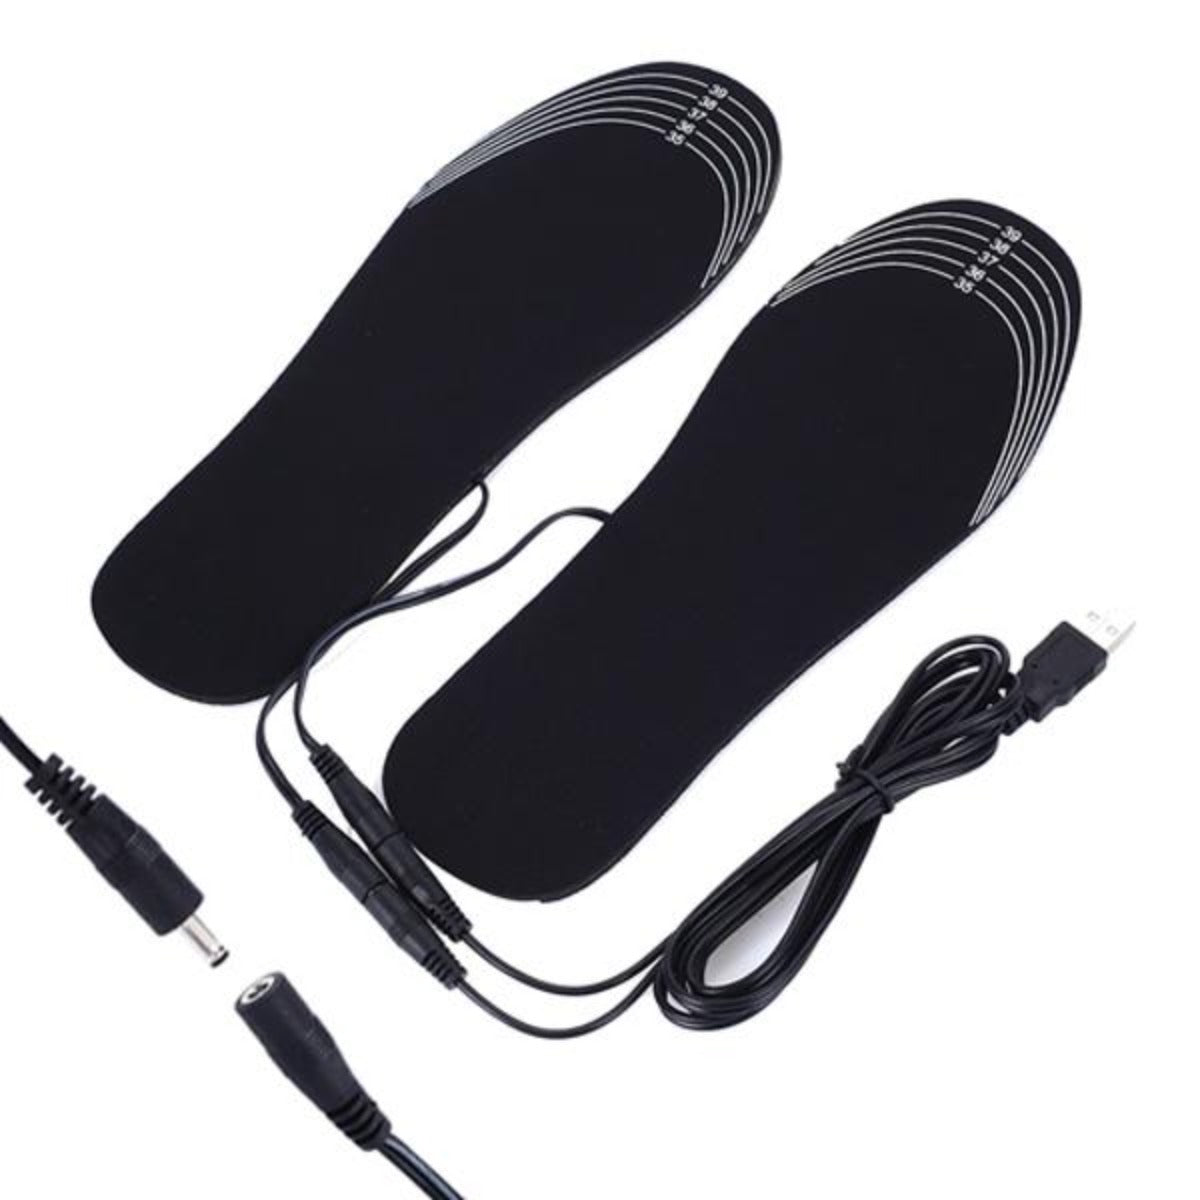 USB Heated Insoles Foot Warmer, Pair